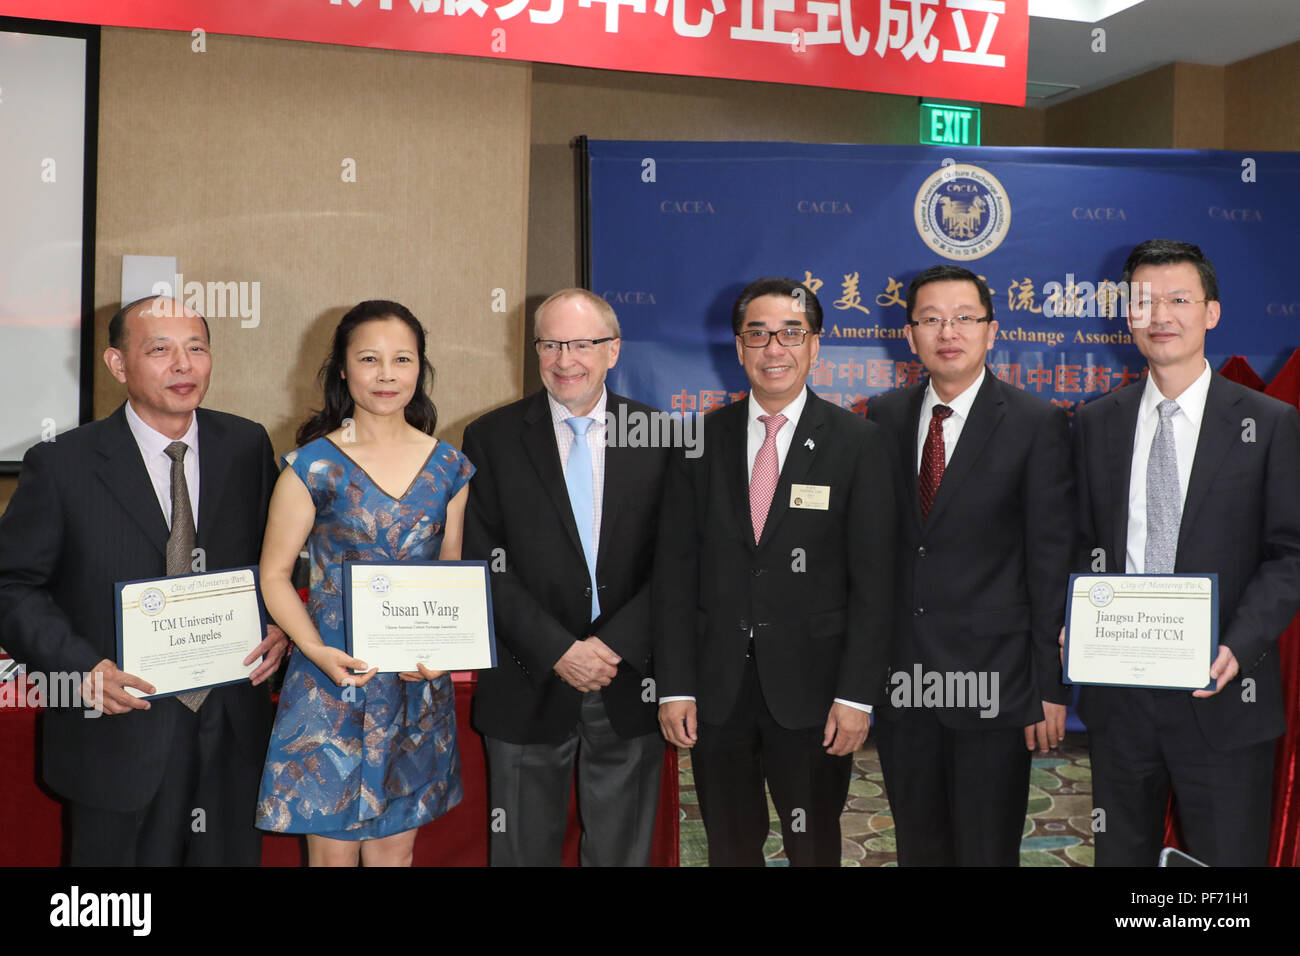 Los Angeles, California, USA. 19th August, 2018. Professor Li Hong, Susan Wang, Harrison Engle, Mayor Lam LIn, Mr. Shuangming, Vice-Consul General Chinese Consulate in Los Angeles, and Zhuyuan Fang, attending the Traditional Chinese Medicine (TCM) Service for Overseas citizens that was launched today in Los Angeles with an  Opening Ceremony and Unveiling held at the Holiday Inn in Diamond Bar, California. The project is jointly sponsored by the Jiangsu Provincial Government and the Jiangsu Provincial Institute of Traditional Chinese Medicine.  Credit: Sheri Determan/Alamy Live News Stock Photo